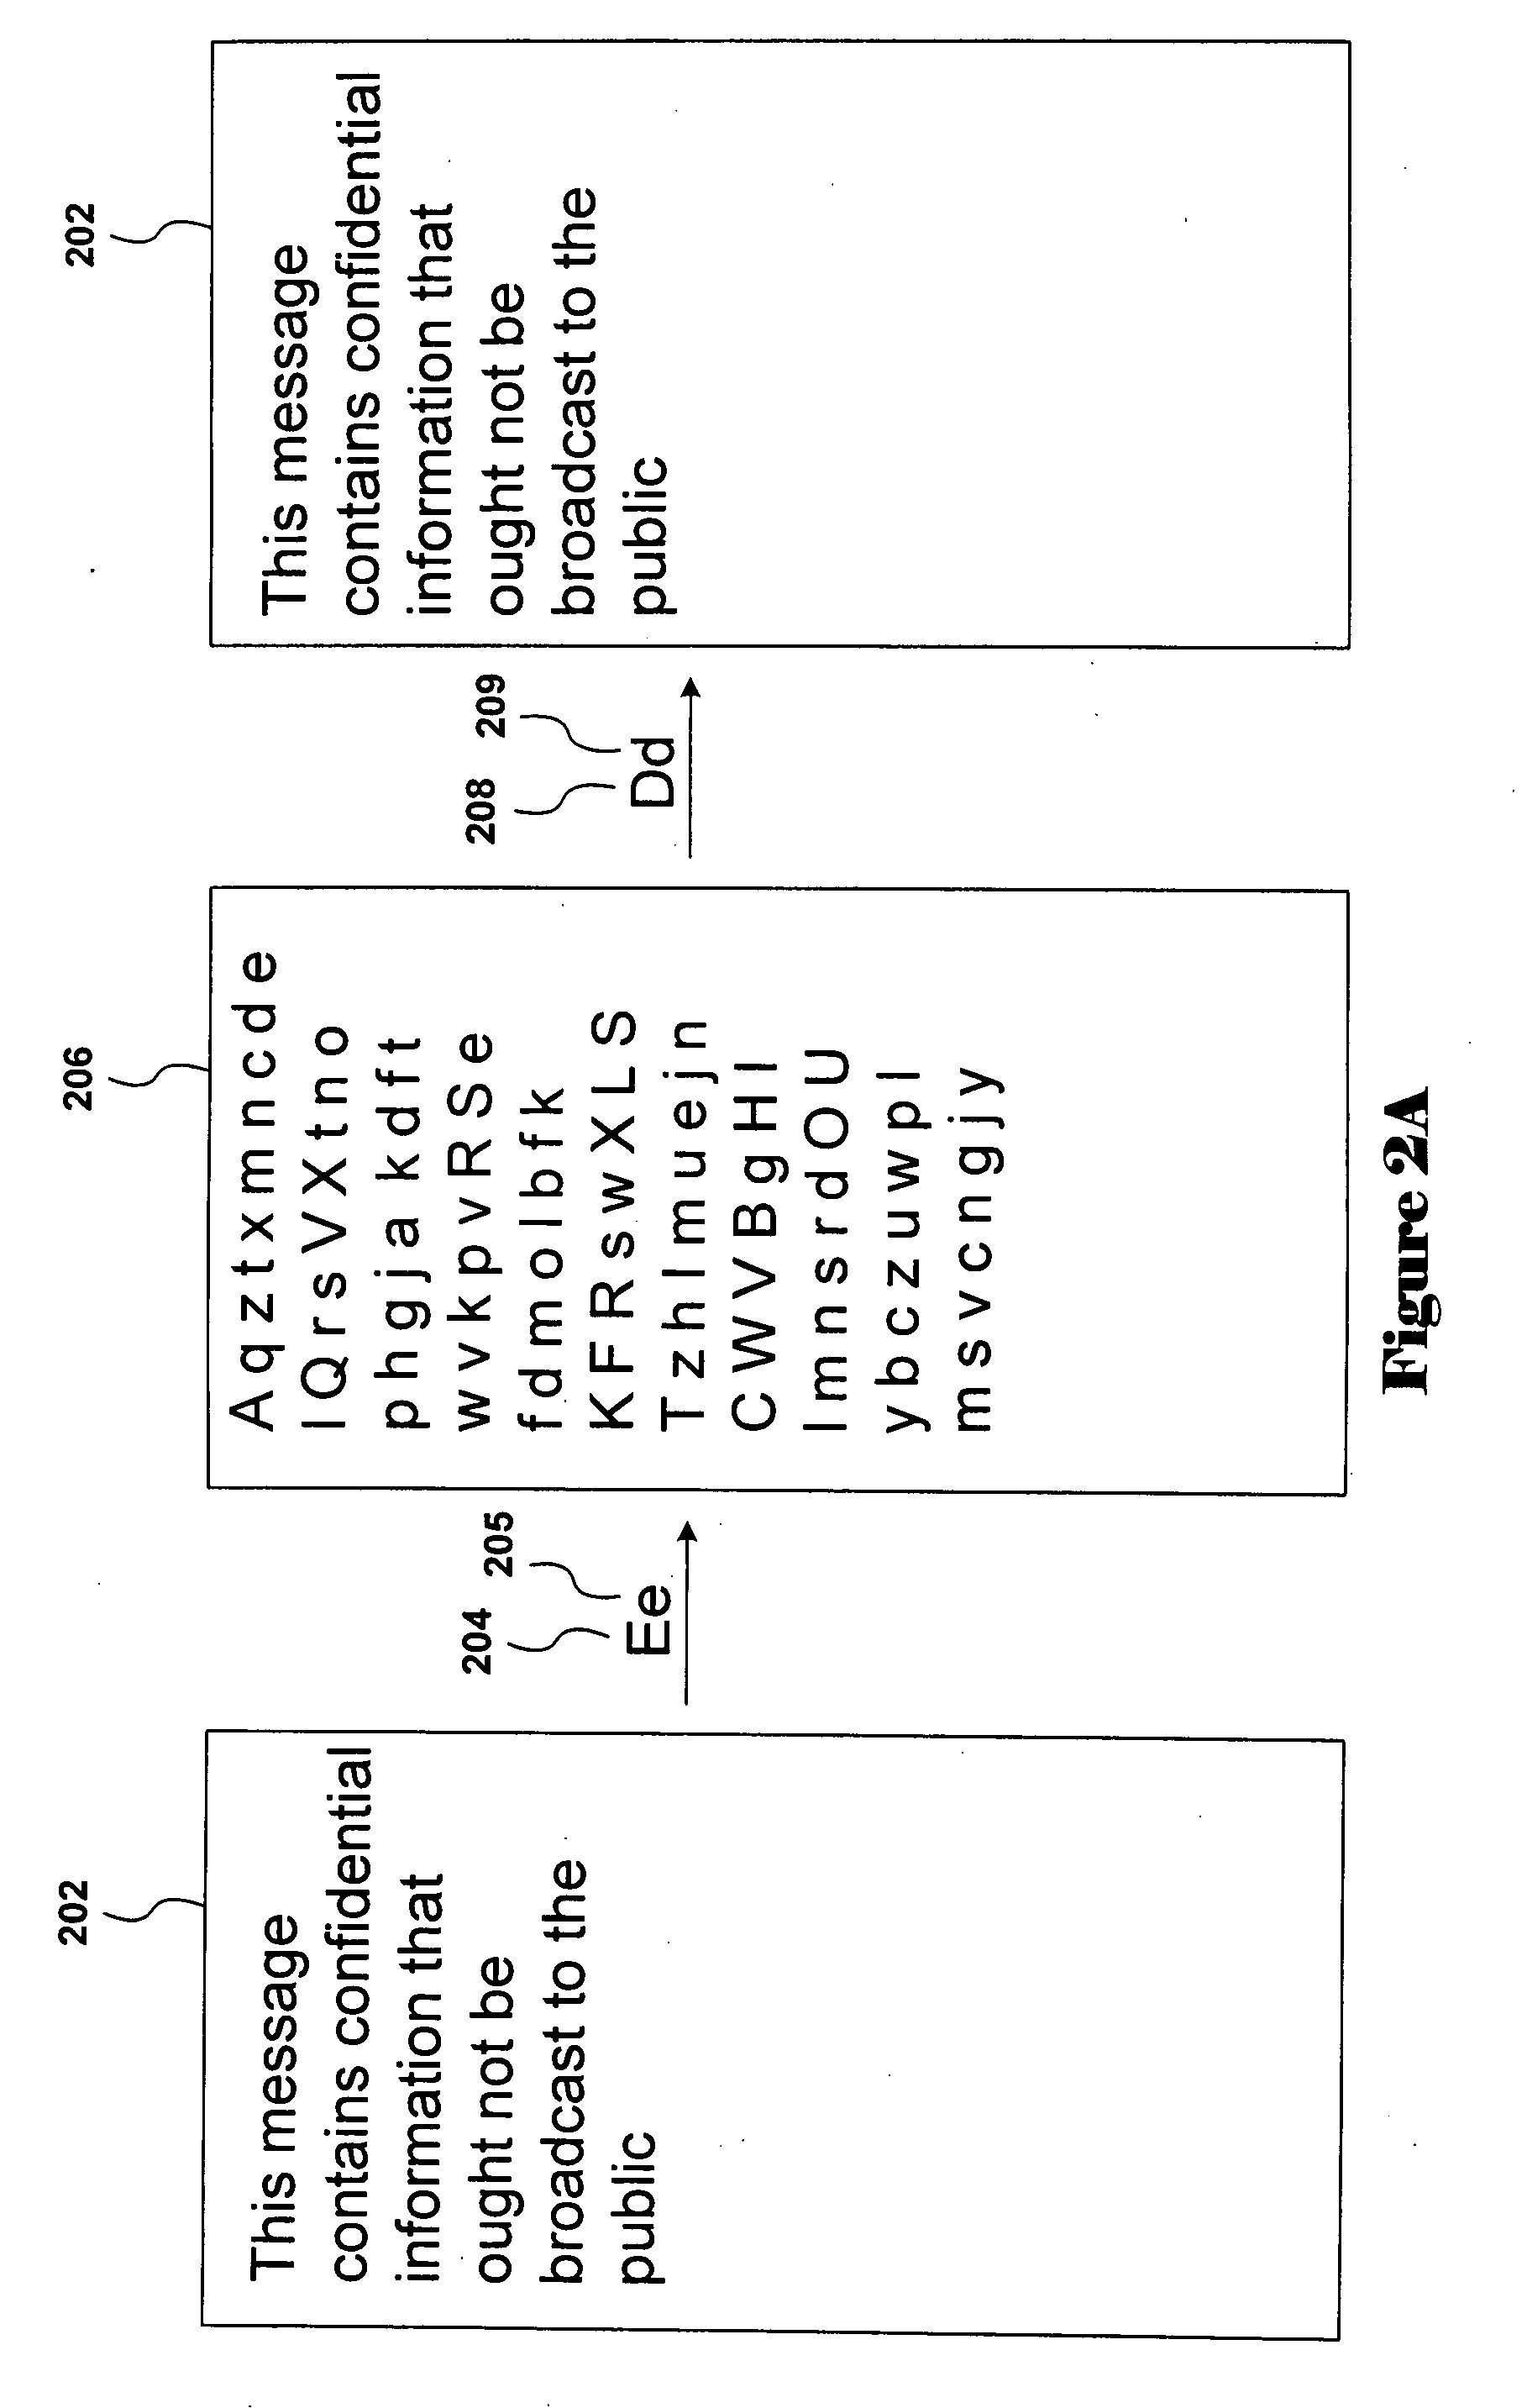 Method and system for phone-number discovery and phone-number authentication for mobile communications devices